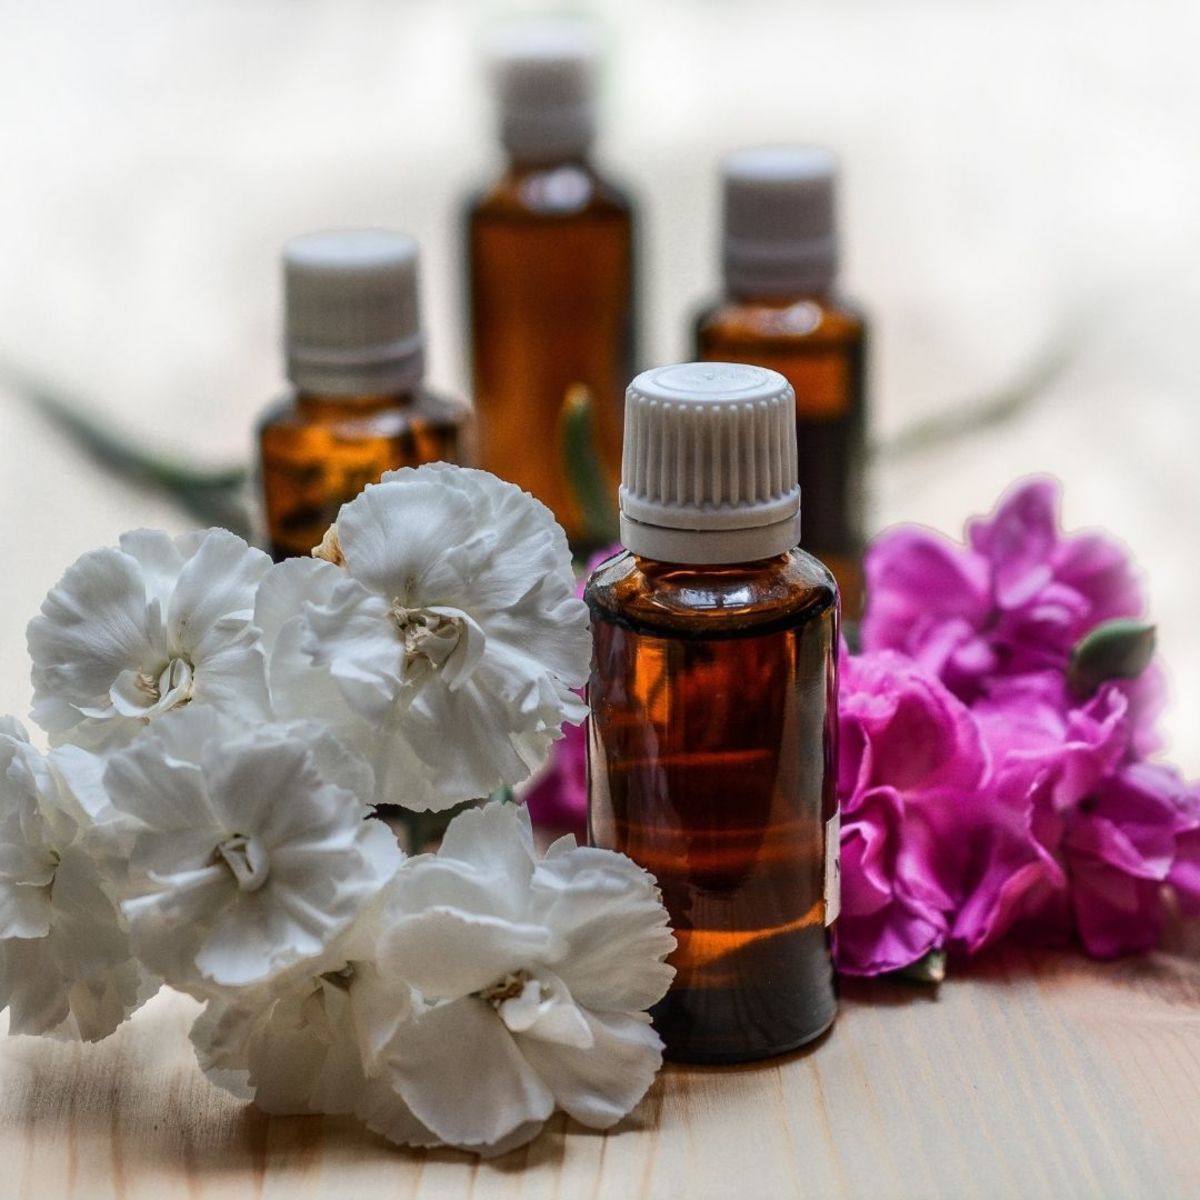 Consider aromatherapy and essential oil diffusers (or burners) to vaporize beautiful scents around your home.